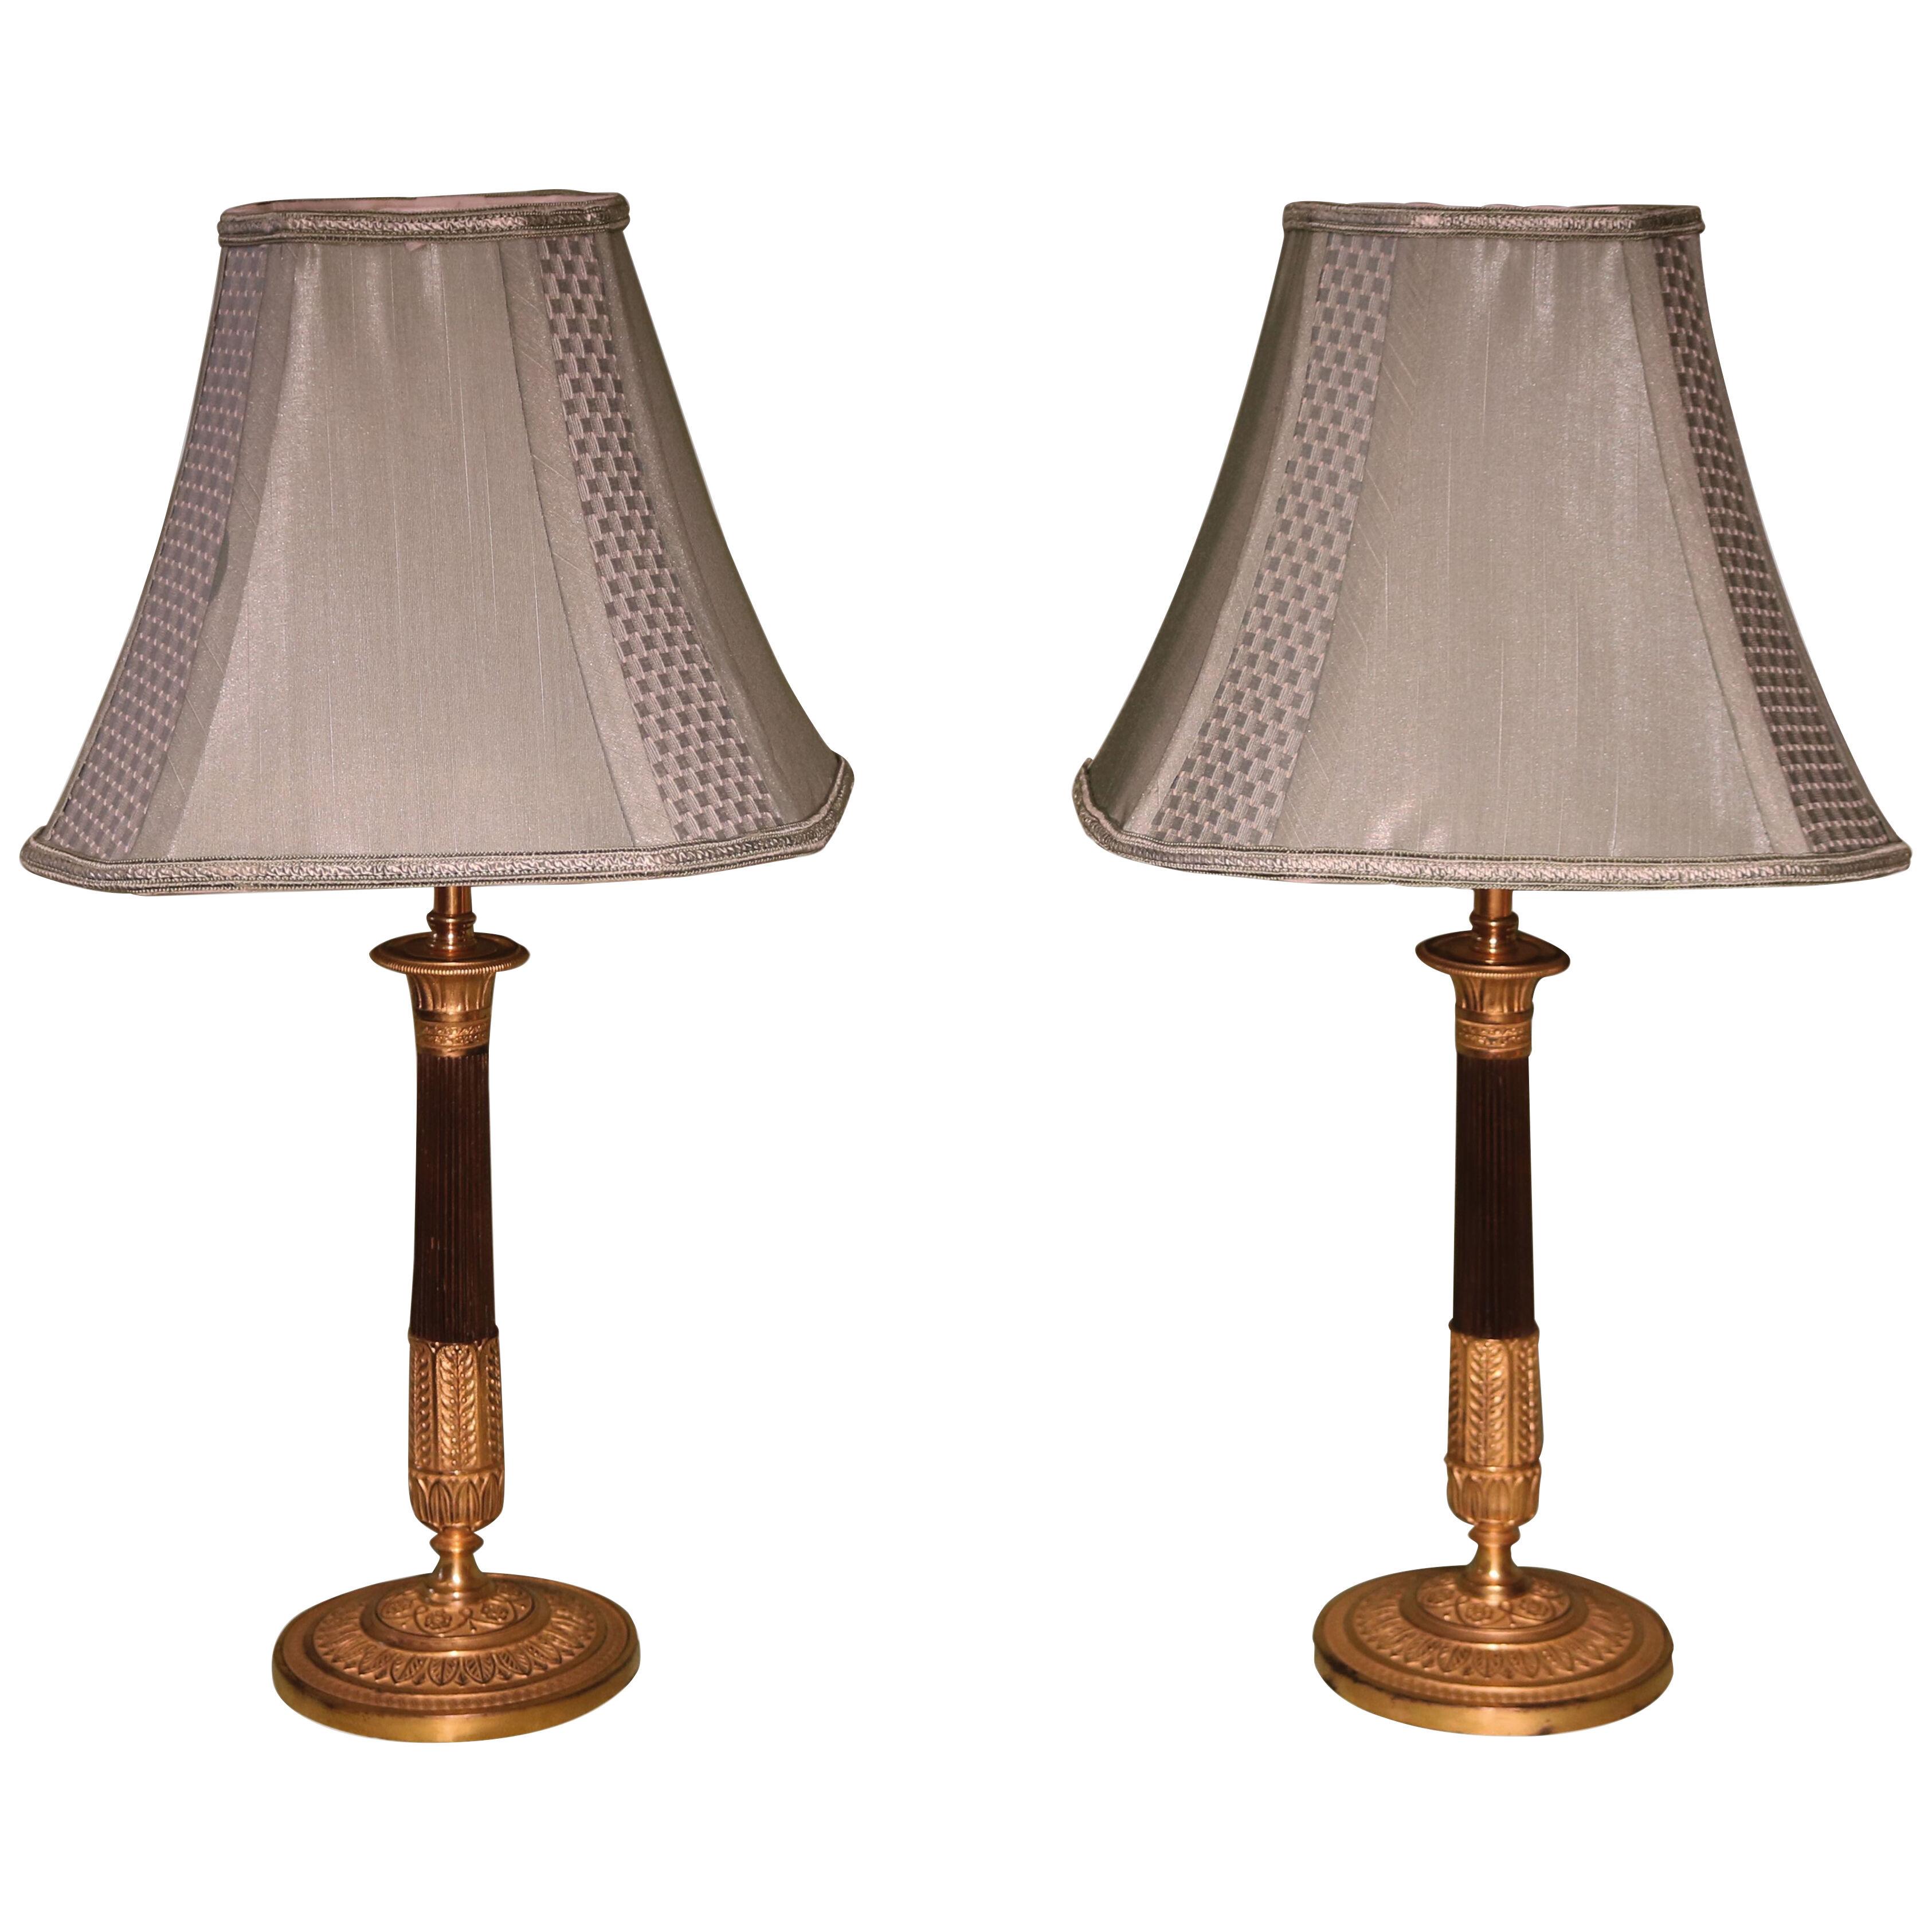 A Pair of 19th century bronze and ormolu candlestick lamps